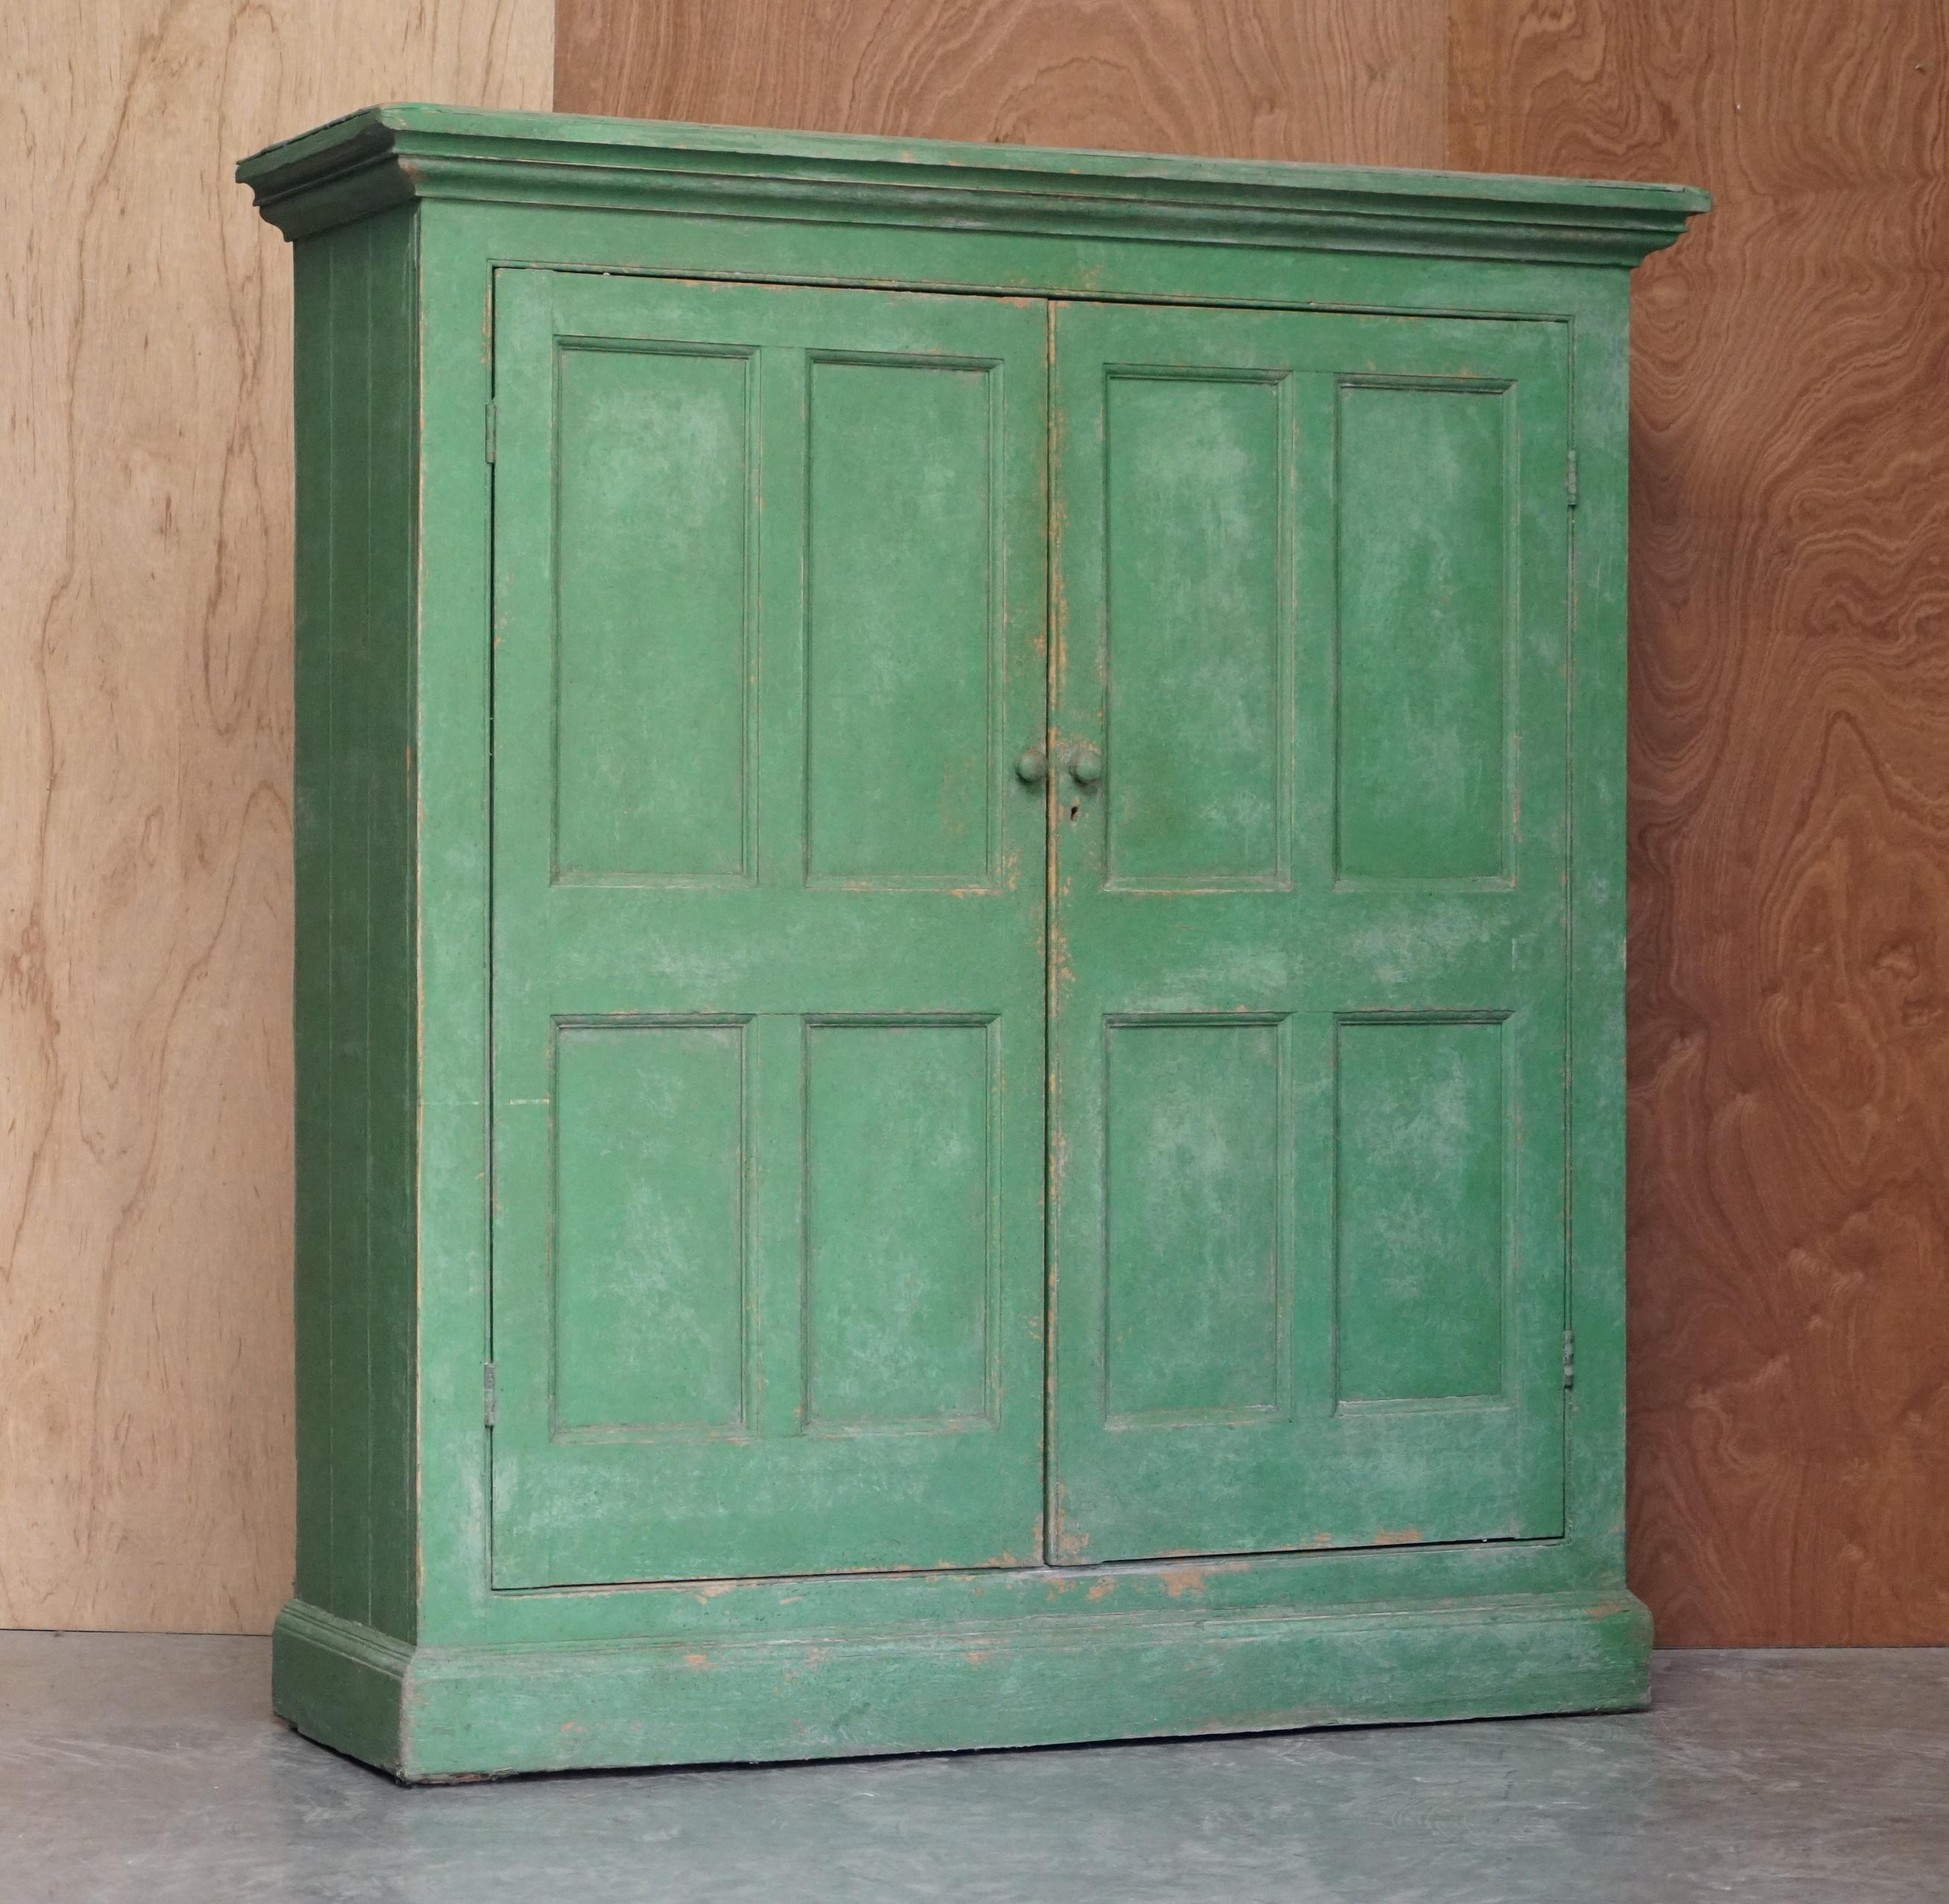 We are delighted to offer for sale this stunning highly collectable hand painted pea green Victorian pine housekeepers cupboard for linens or pots

A very charming and highly collectable piece, the painting is beautifully aged and looks sublime in